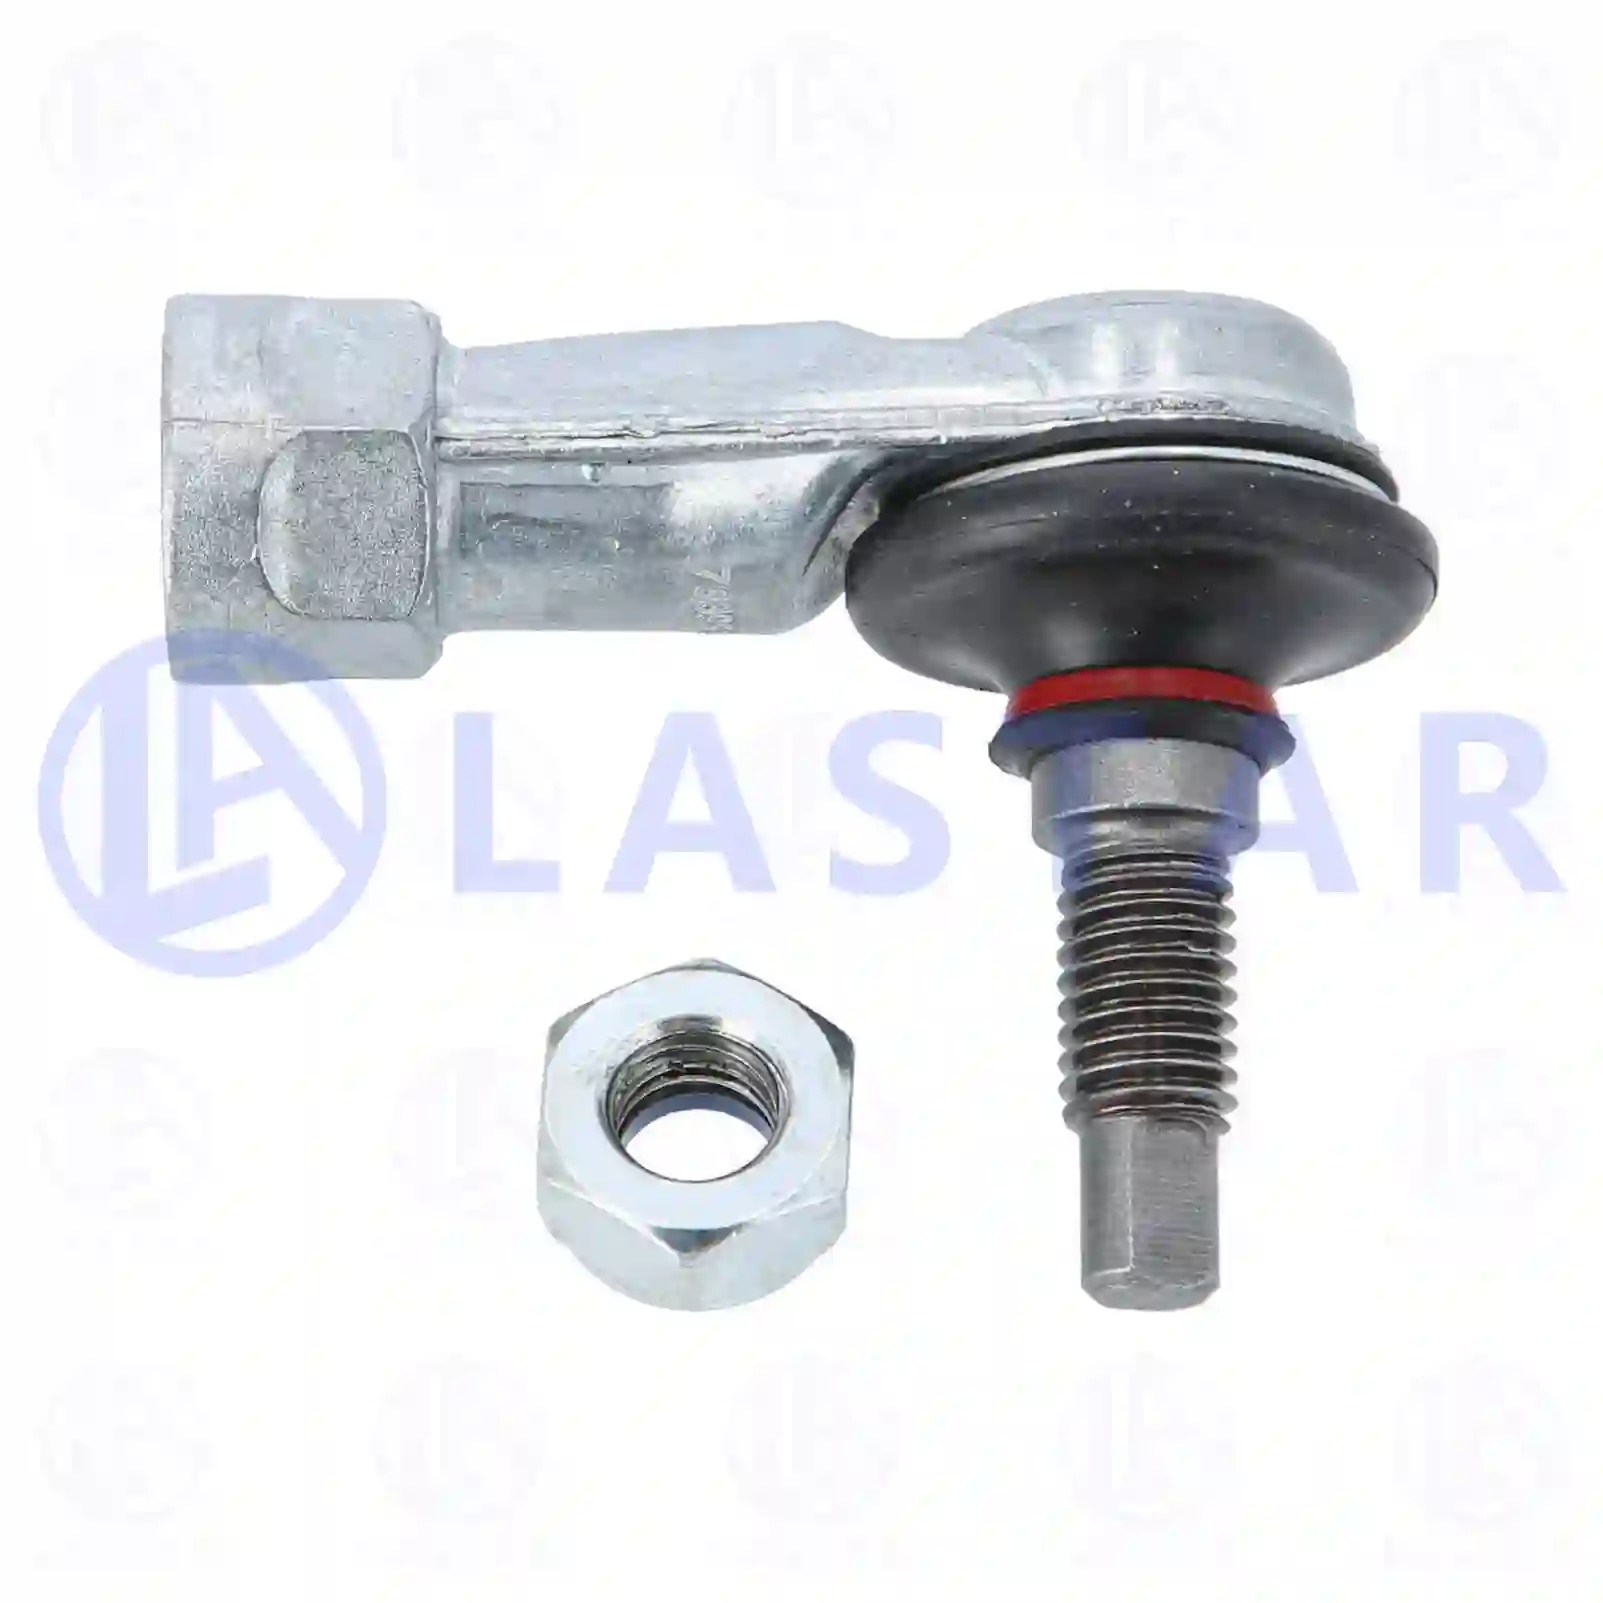 Gear Shift Lever Ball joint, right hand thread, la no: 77731752 ,  oem no:00021928, 3140852R1, 0589333, 0656085, 1249129, 140362, 589333, 656085, 652261, 08198188, 42485639, 7394146, 08198188, 42485639, 08198188, 42485639, 503136164, 8198188, 2150021100, 500687408, 81953016064, 81953016130, 81953016170, 81953016173, 90900989010, 0002684689, 0002685189, 0002686289, 0002688289, 0002689689, 3662680389, 011010219, 5010129530, 1384898, 305320, 371452, 421326, 523744, 525733, 527056, 0928500080, 99100240090, 1190131, 11901311, 1696685, ZG40138-0008 Lastar Spare Part | Truck Spare Parts, Auotomotive Spare Parts